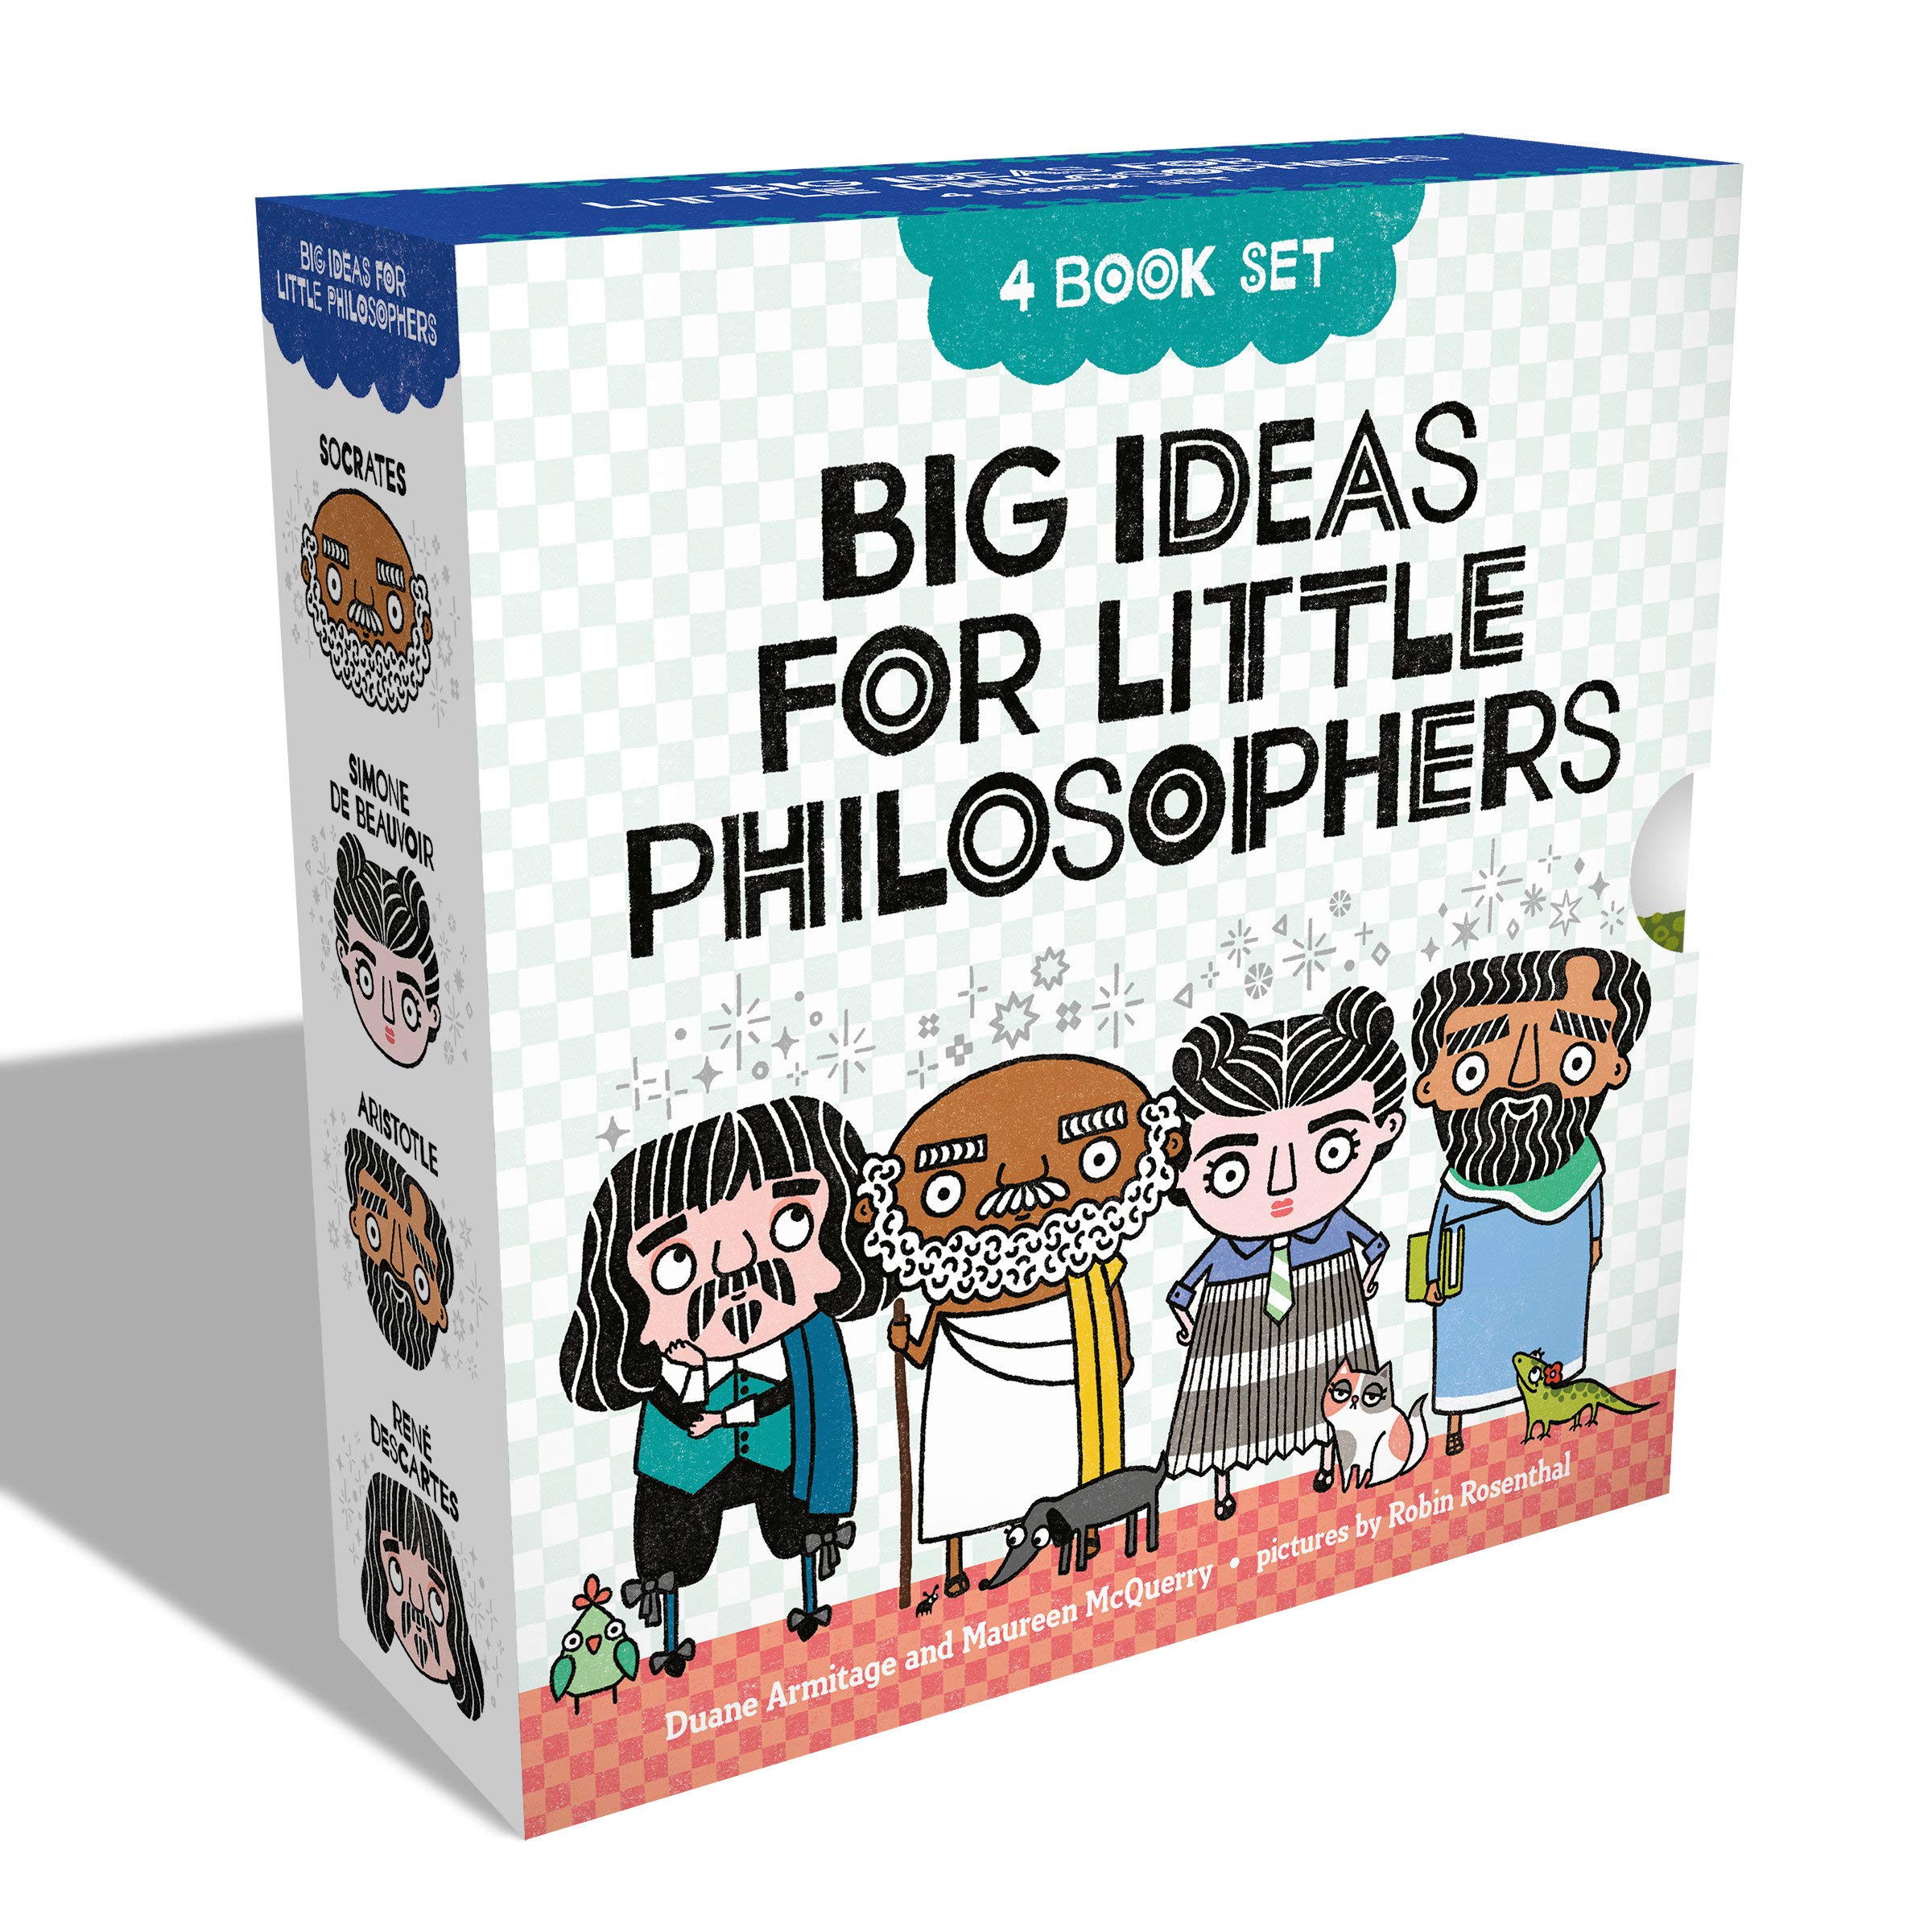 Big Ideas for Little Philosophers Box Set Board book by Duane Armitage  (Author), Maureen McQuerry  (Author), Robin Rosenthal  (Illustrator)